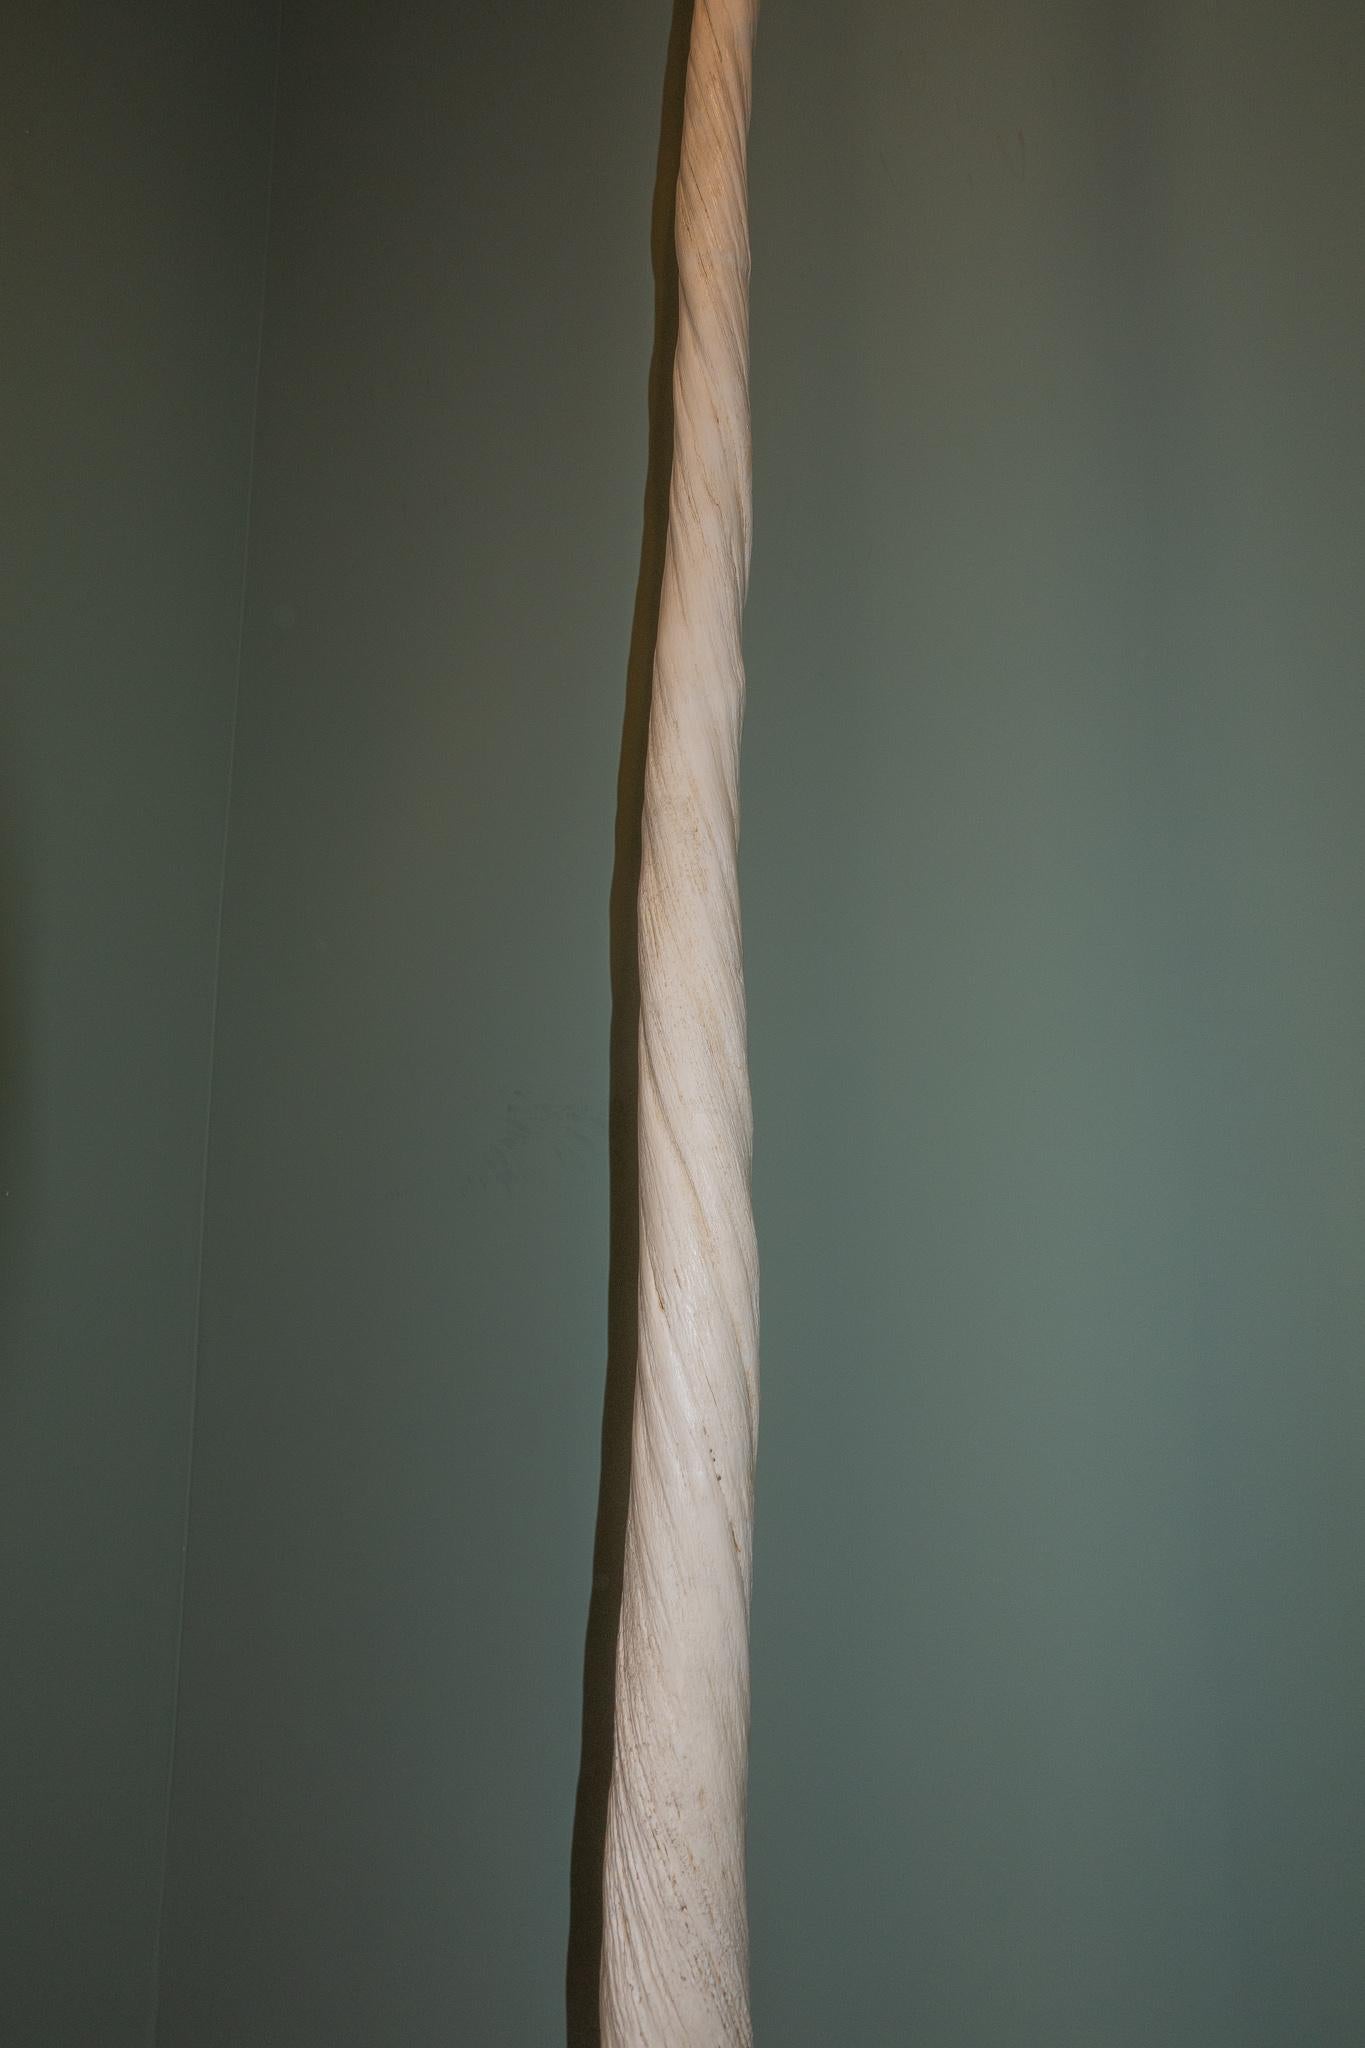 REPLICA NARWHAL TUSK 67.25 inches long Cut in Half for Shipping #3775